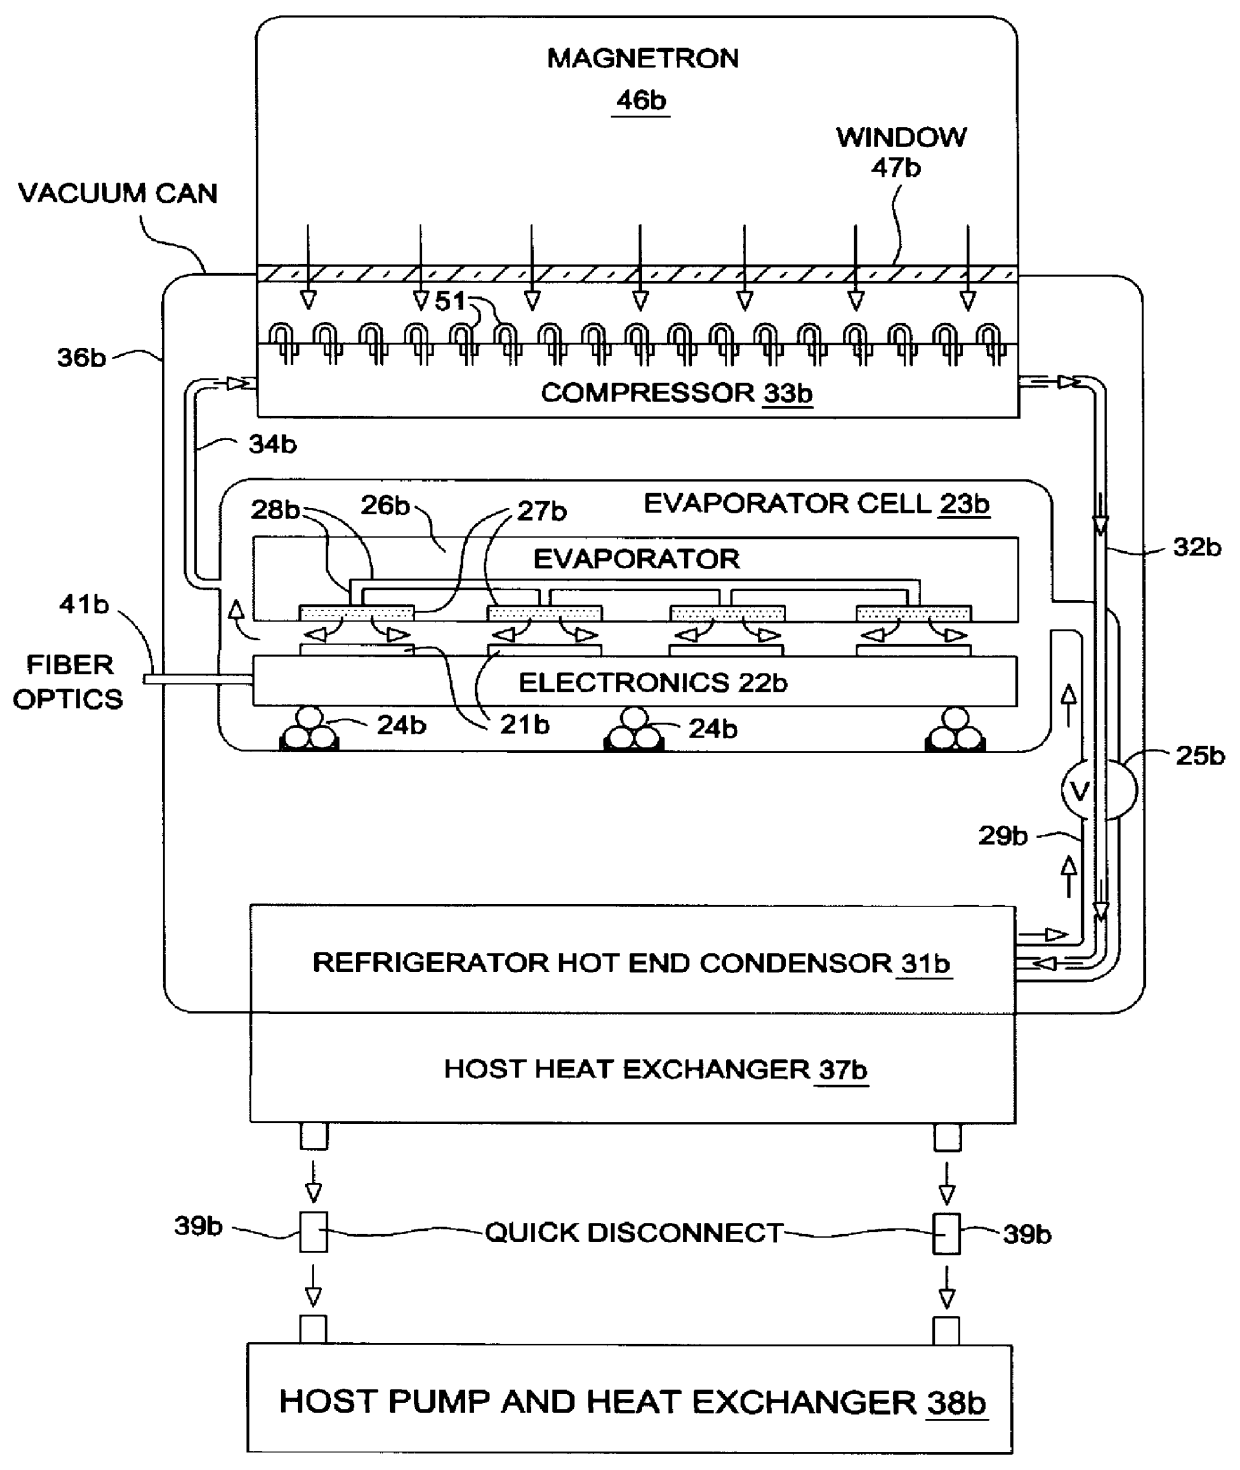 Refrigeration system for electronic components having environmental isolation